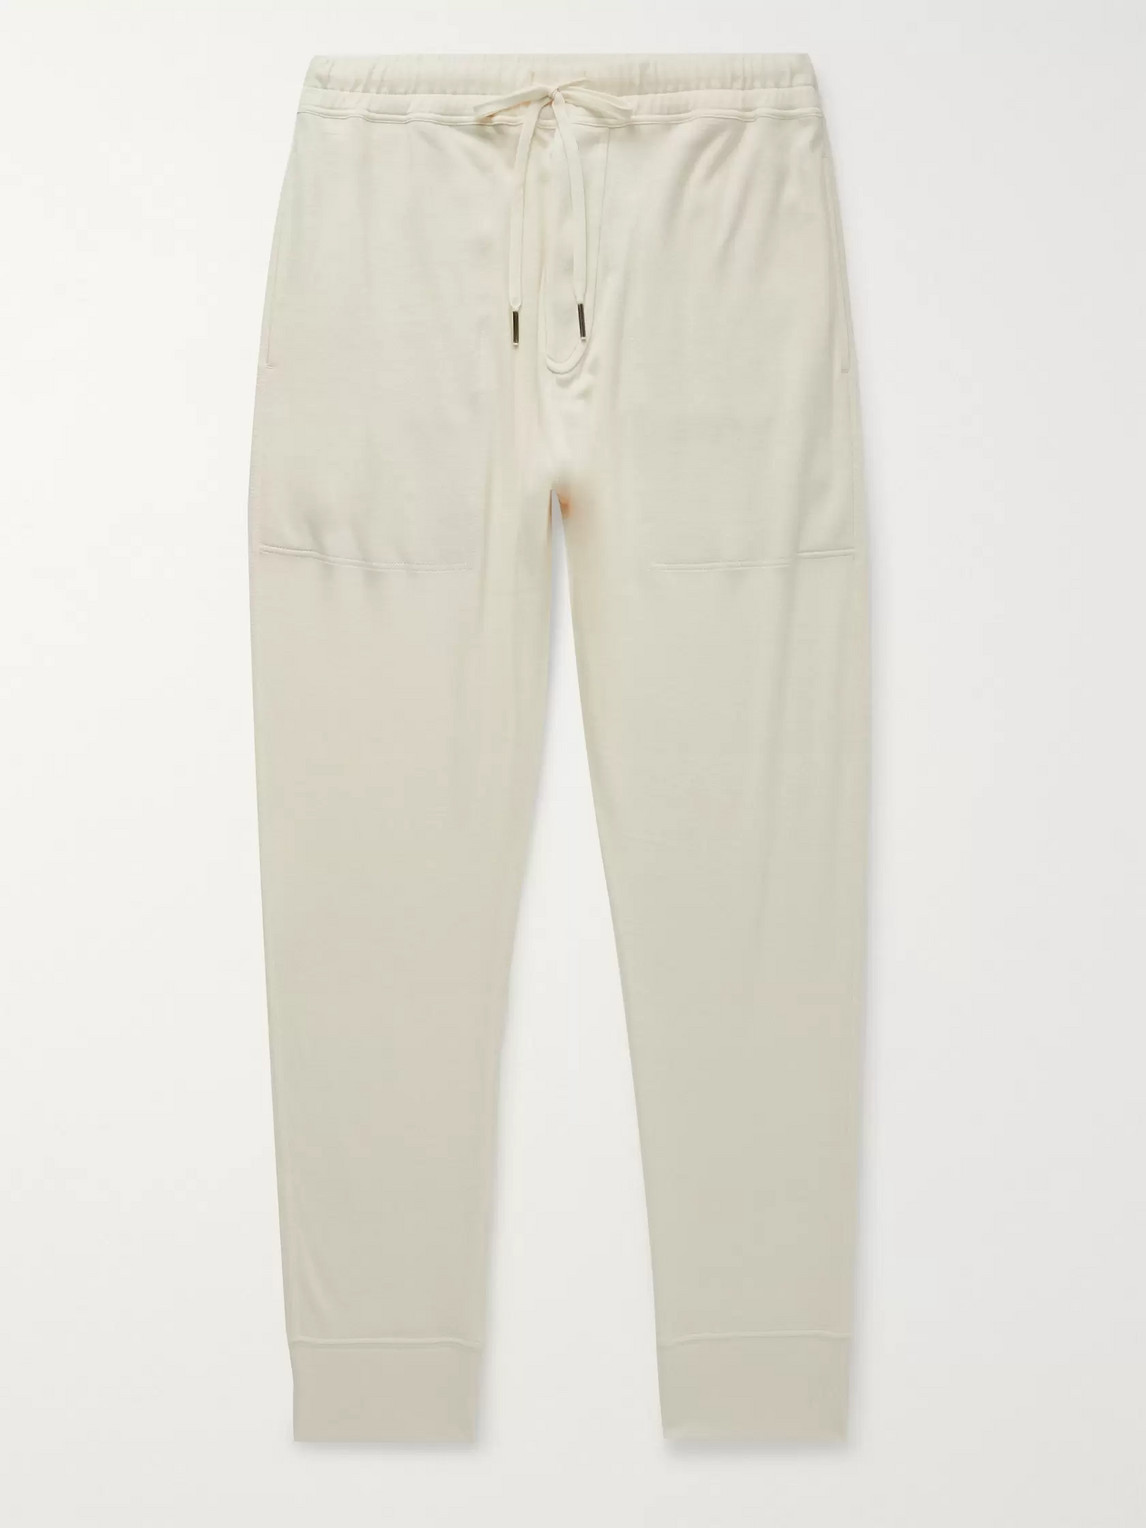 Tom Ford Tapered Cashmere Sweatpants In Neutrals